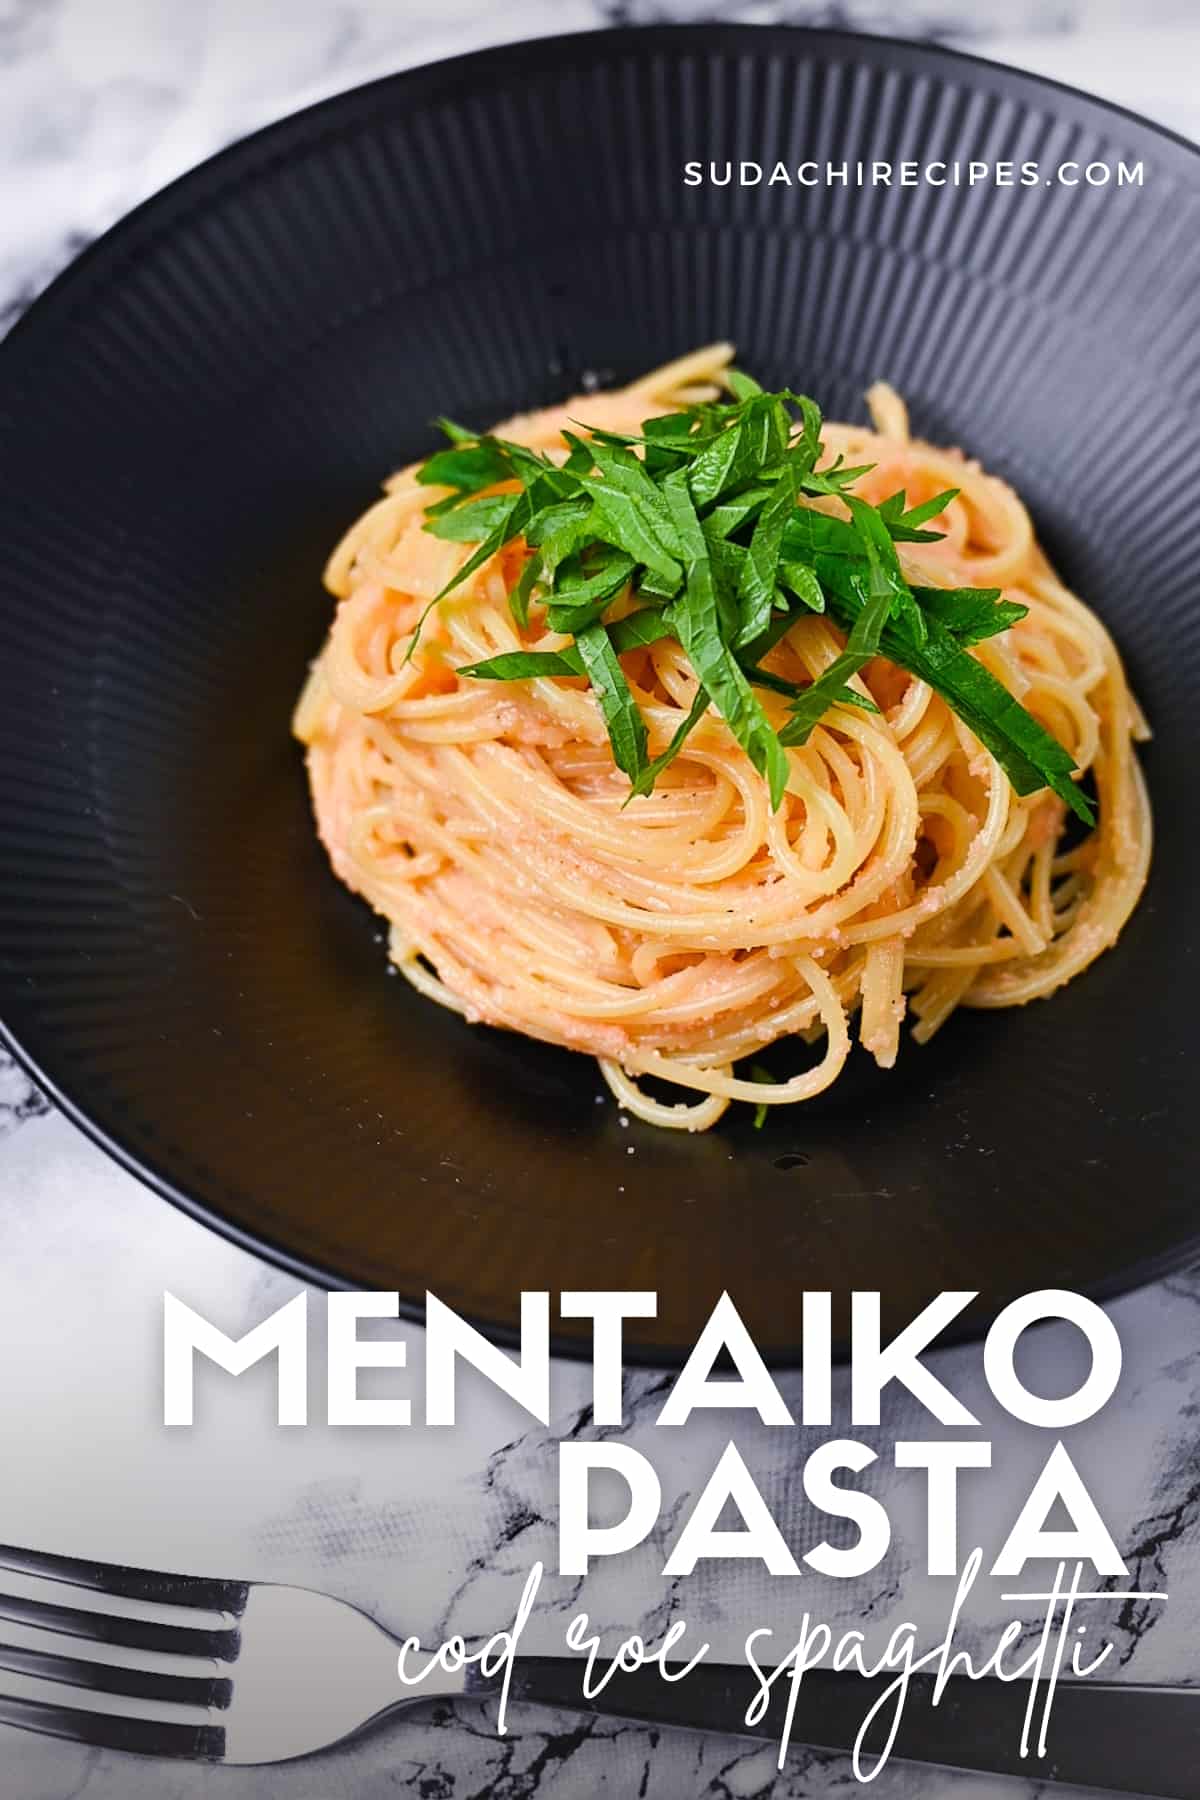 Mentaiko pasta (cod roe spaghetti) in a black pasta dish topped with shredded shiso (Perilla) leaves